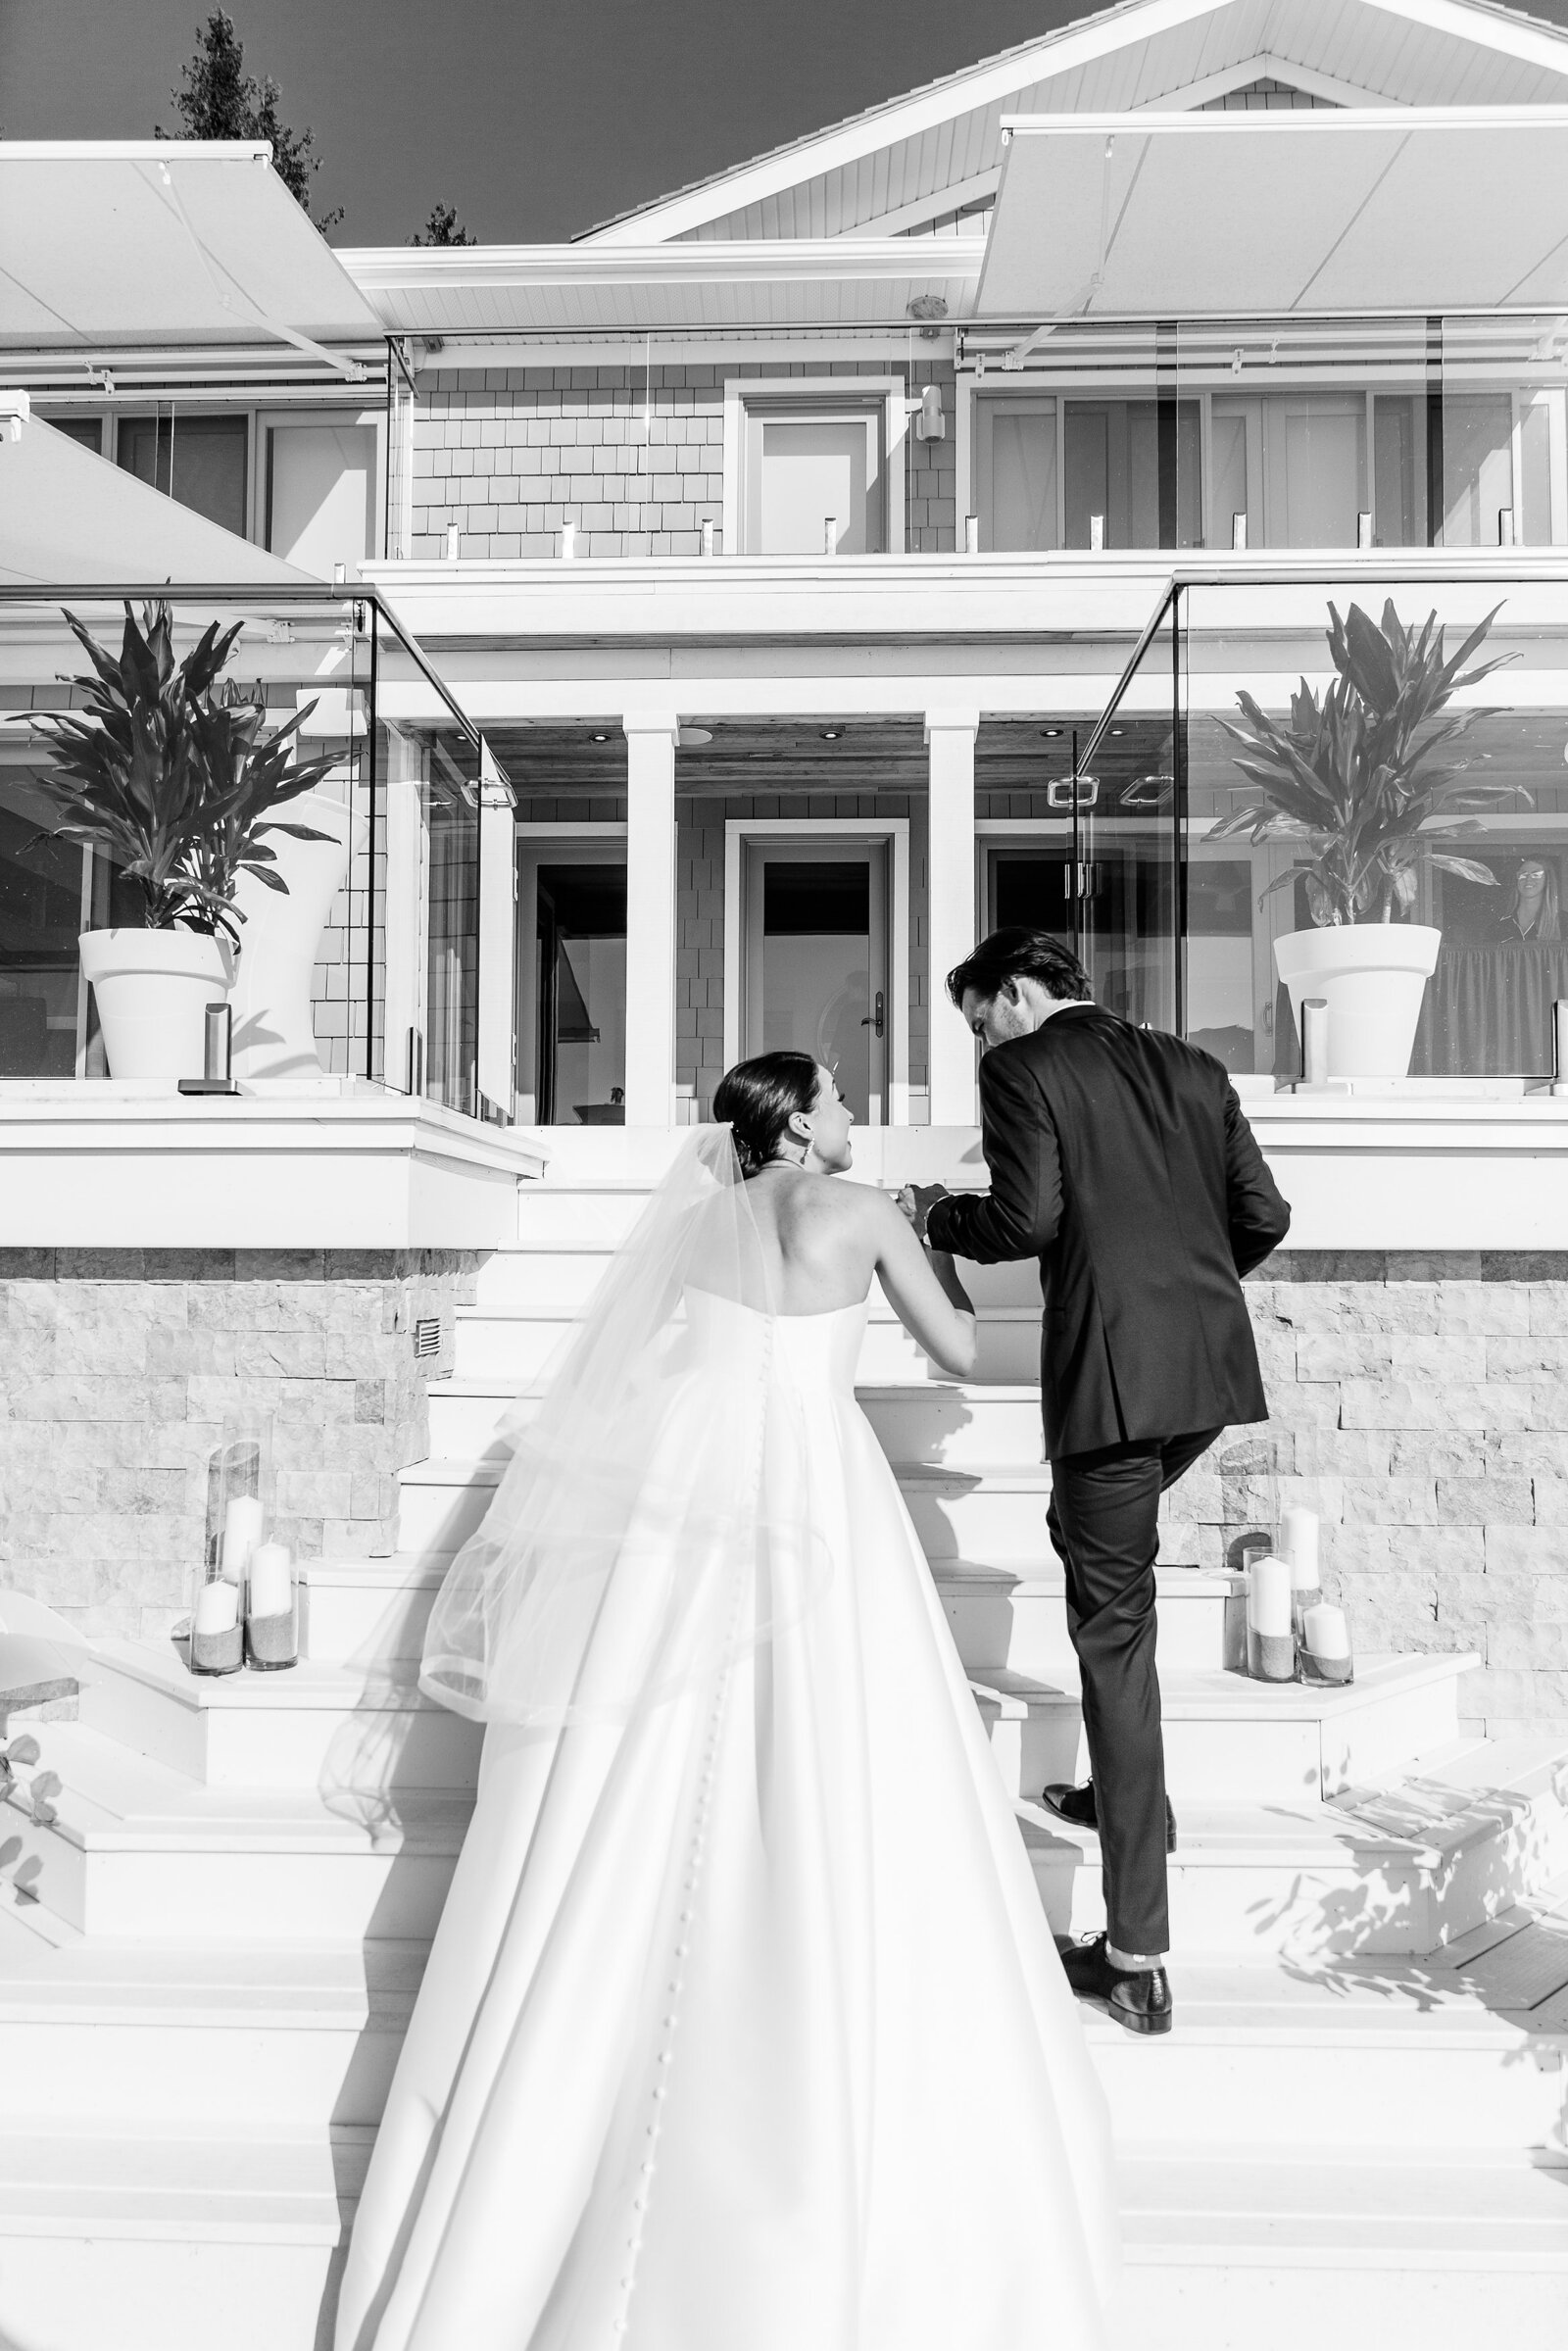 After their wedding ceremony in Zurich ontario bride and groom go up the steps of their beach house to celebrate